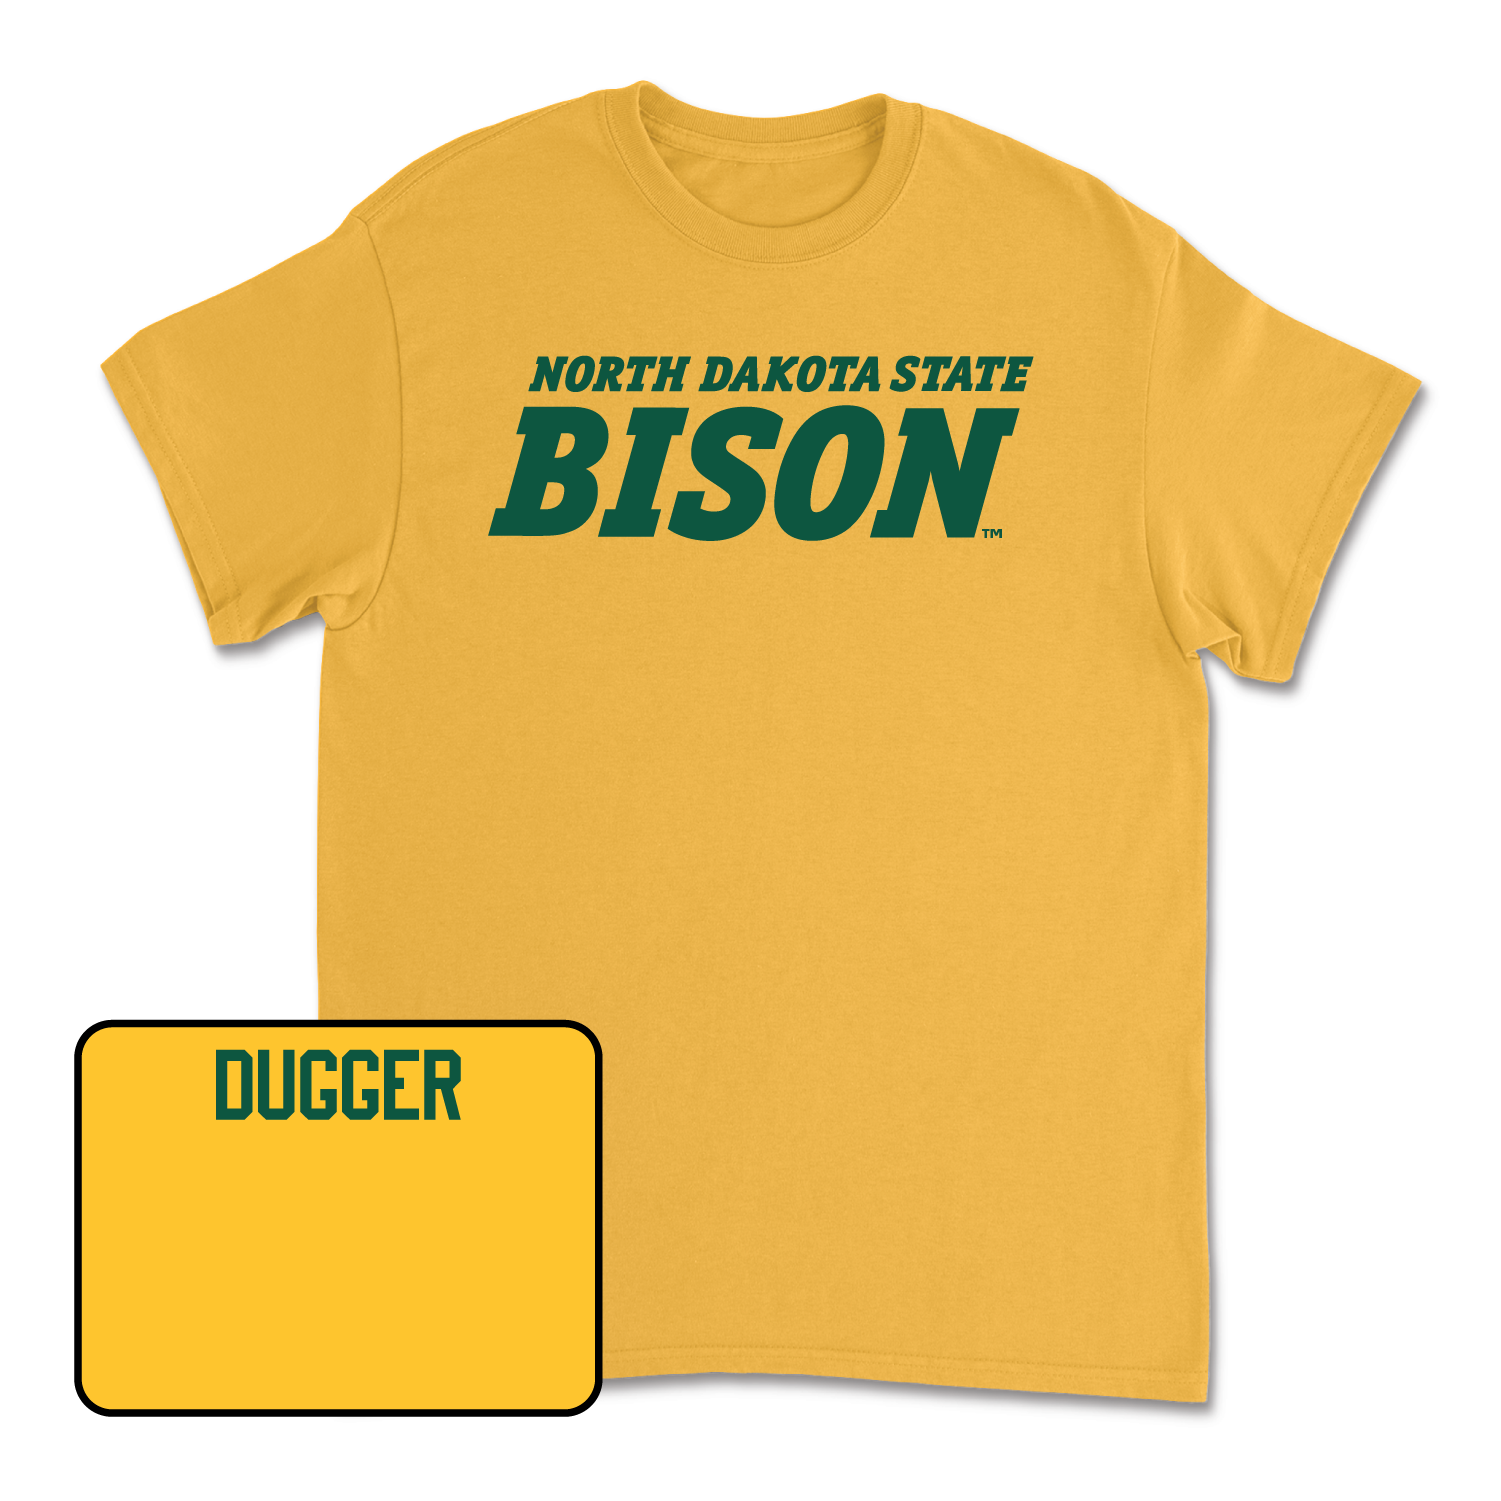 Gold Track & Field Bison Tee Youth Small / Adam Dugger